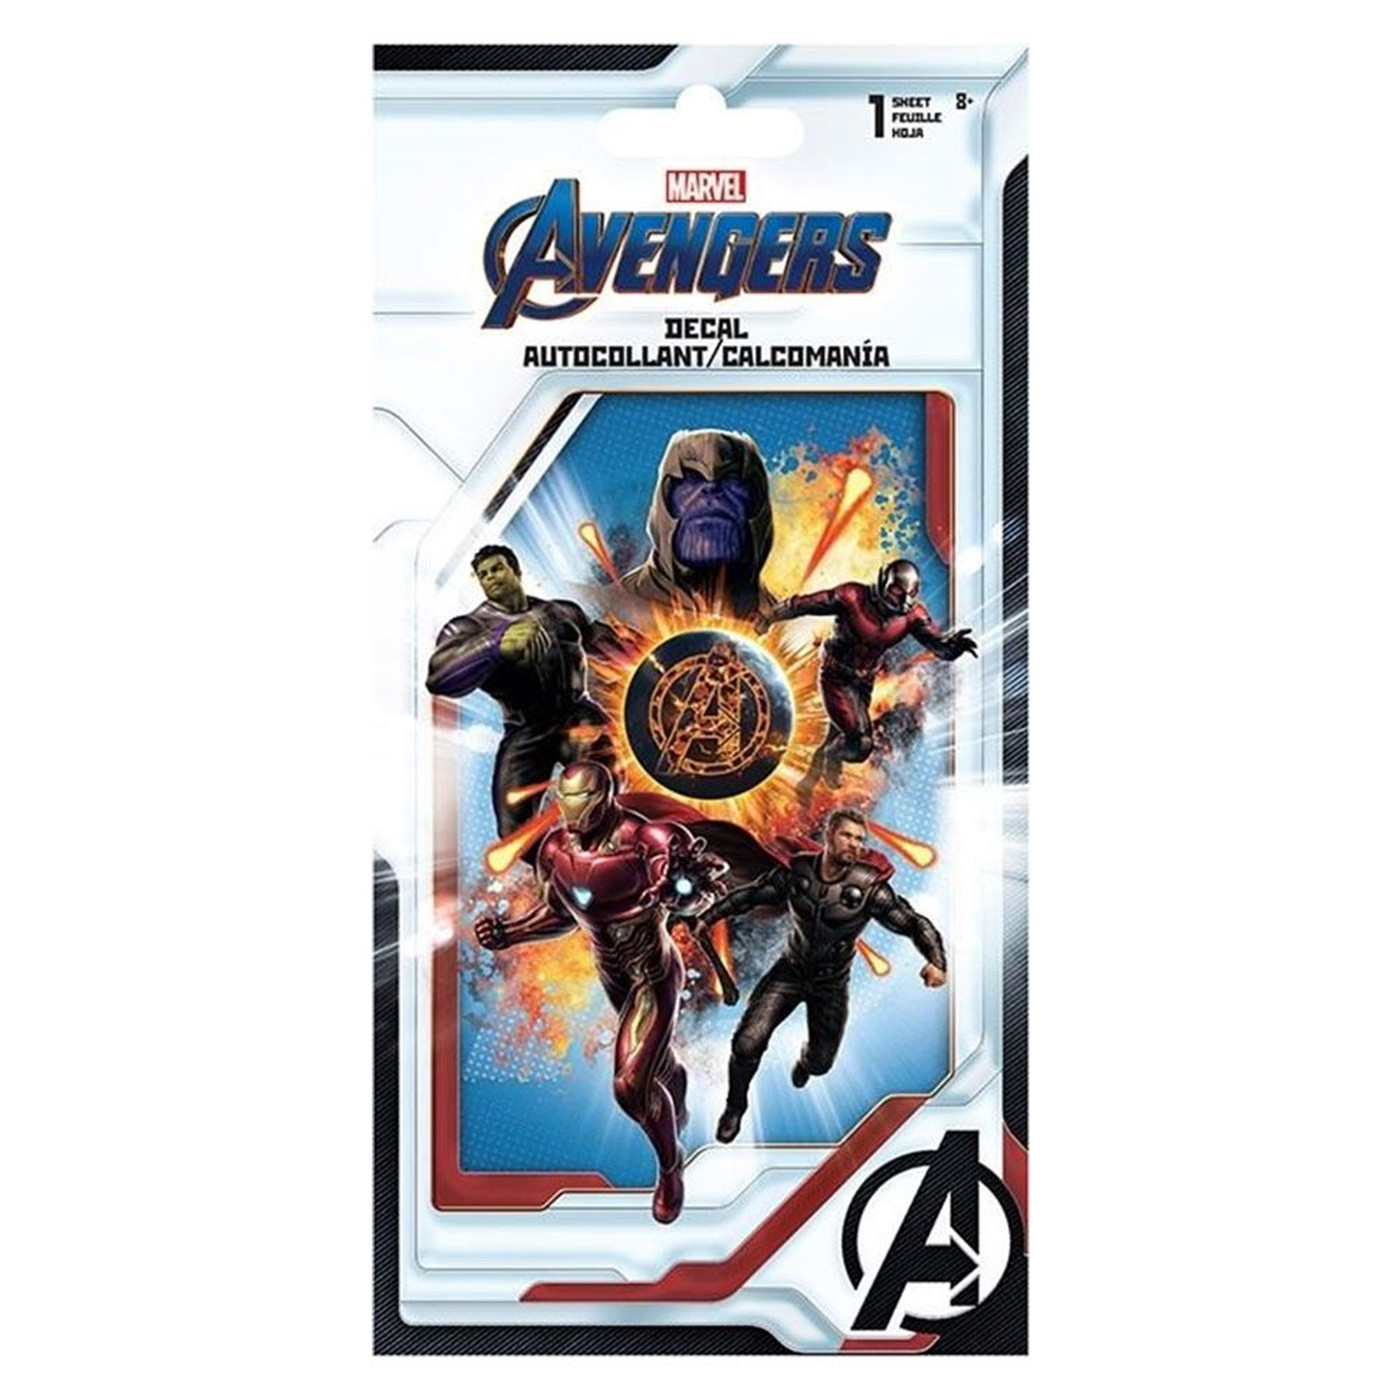 Avengers Endgame 4-Color Decal